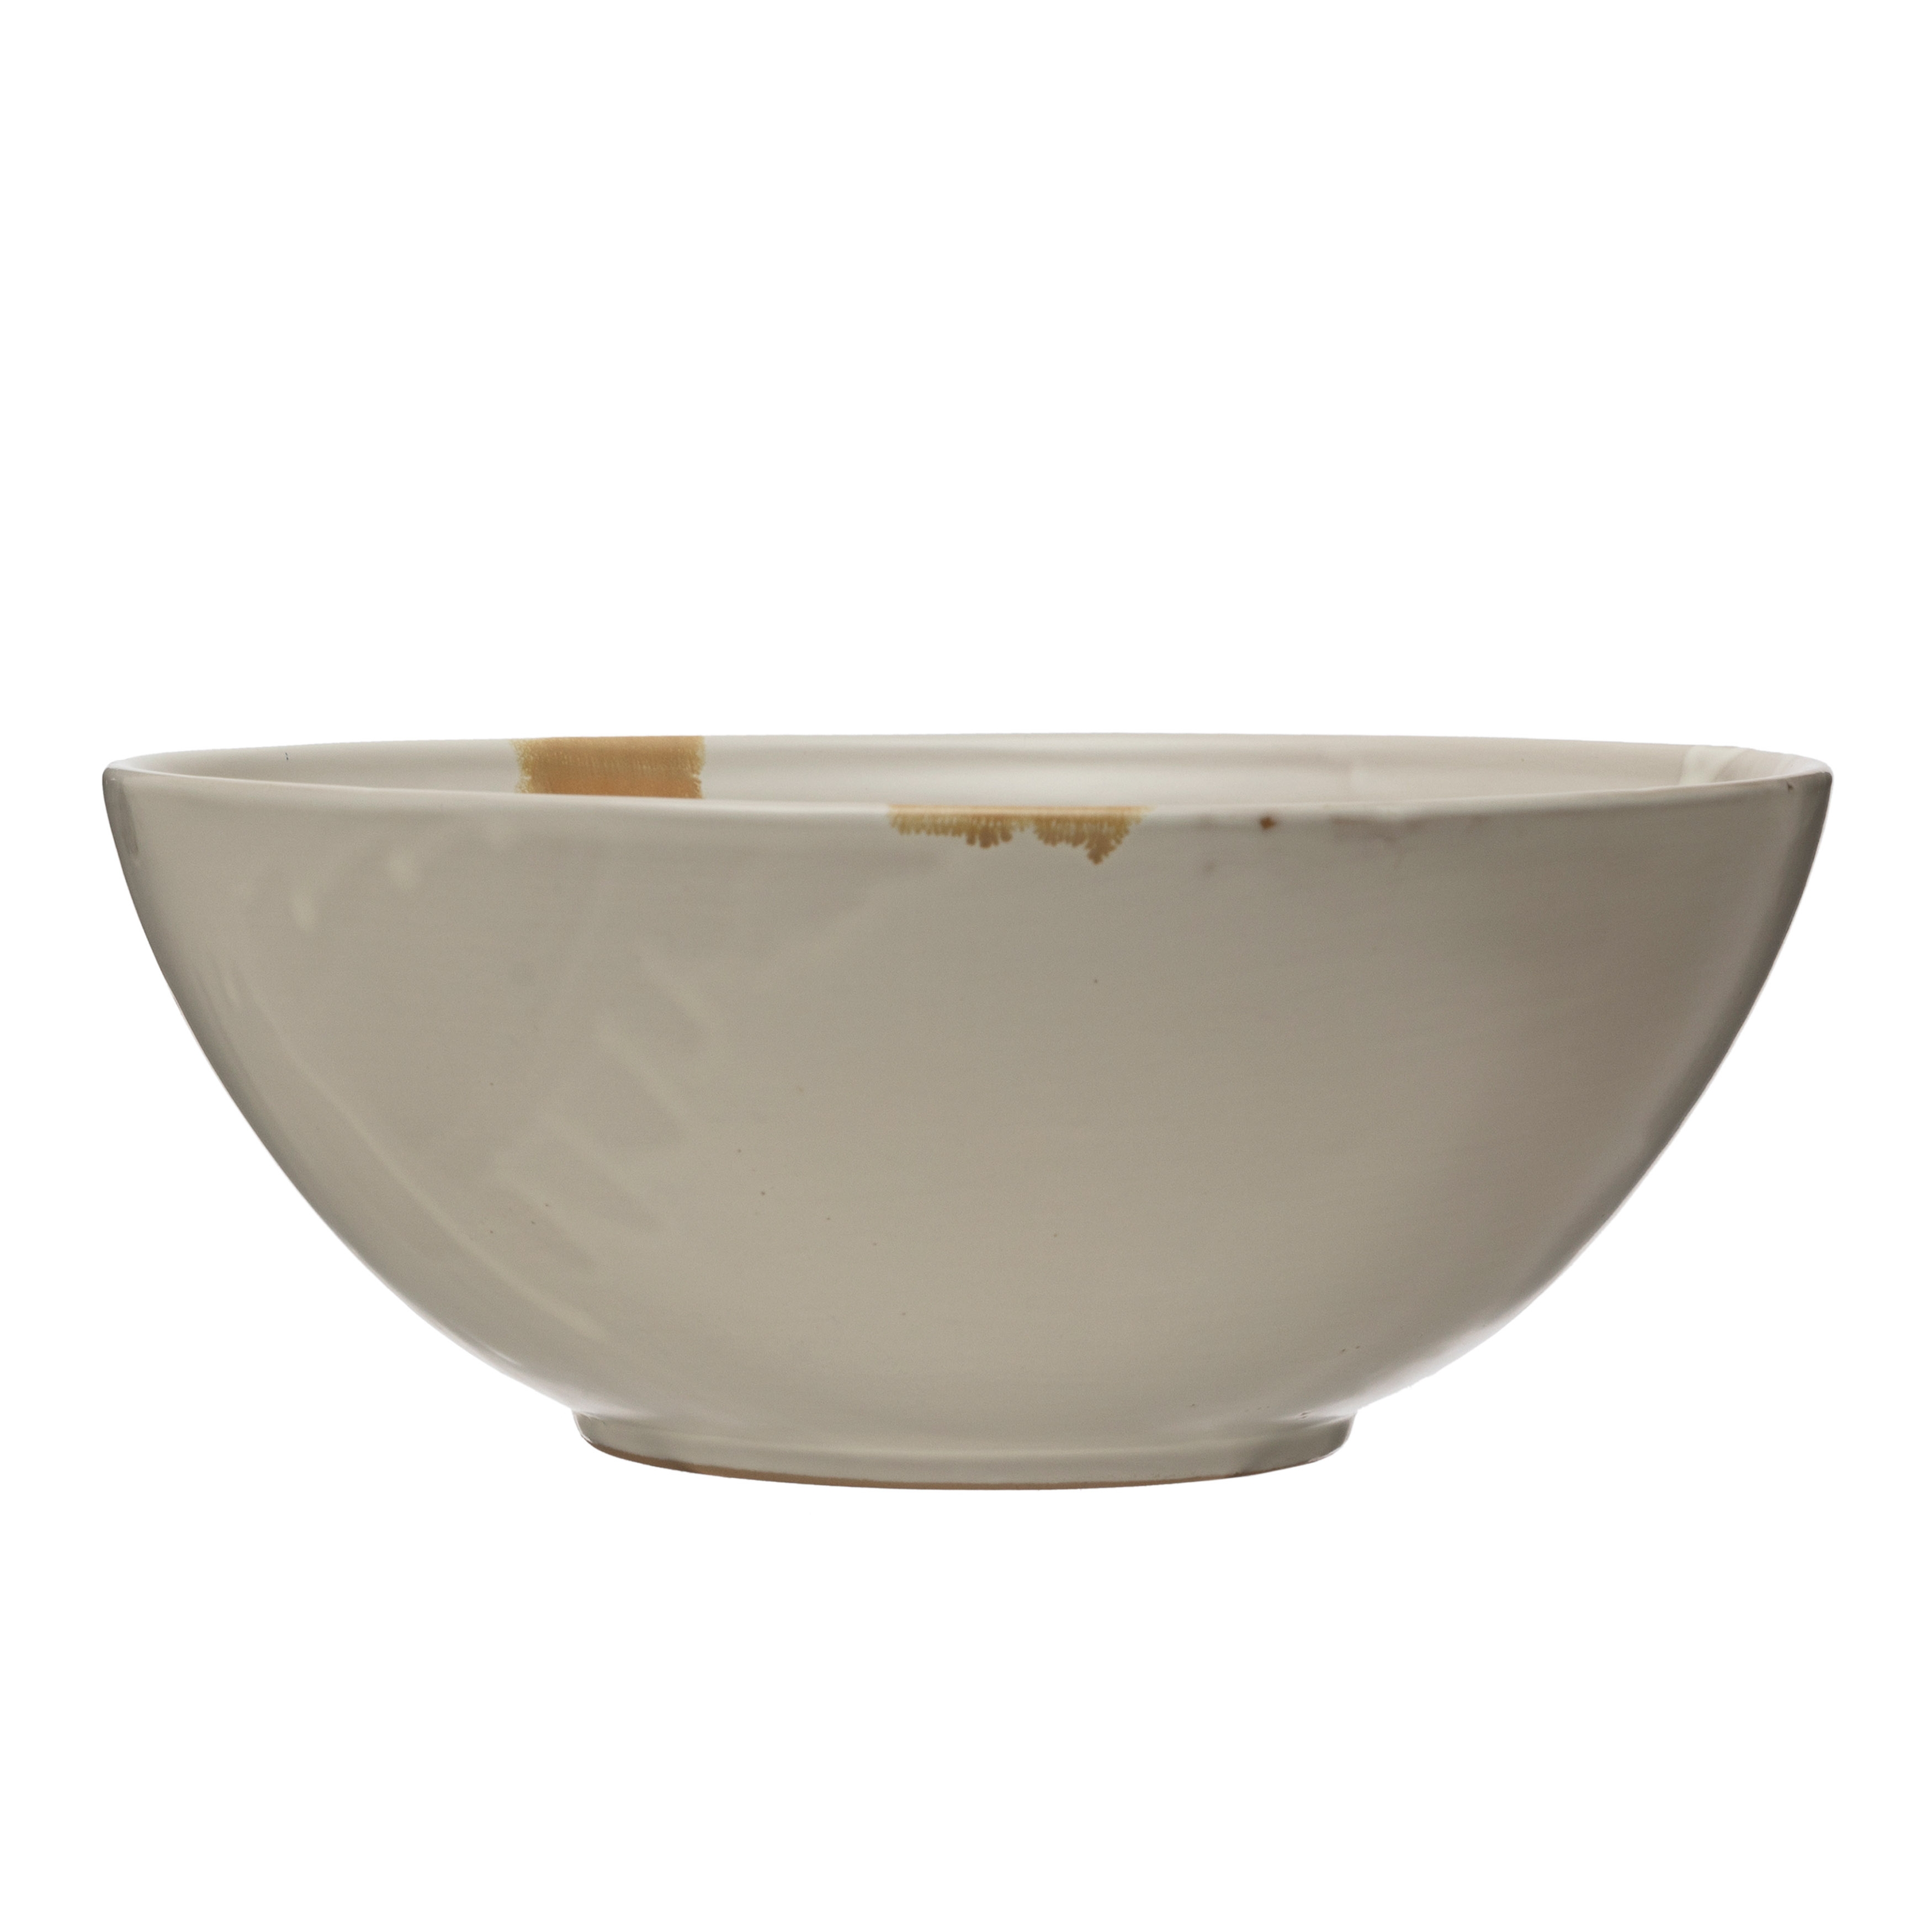  Stoneware Serving Bowl, Cream and Brown Reactive Glaze - Image 0